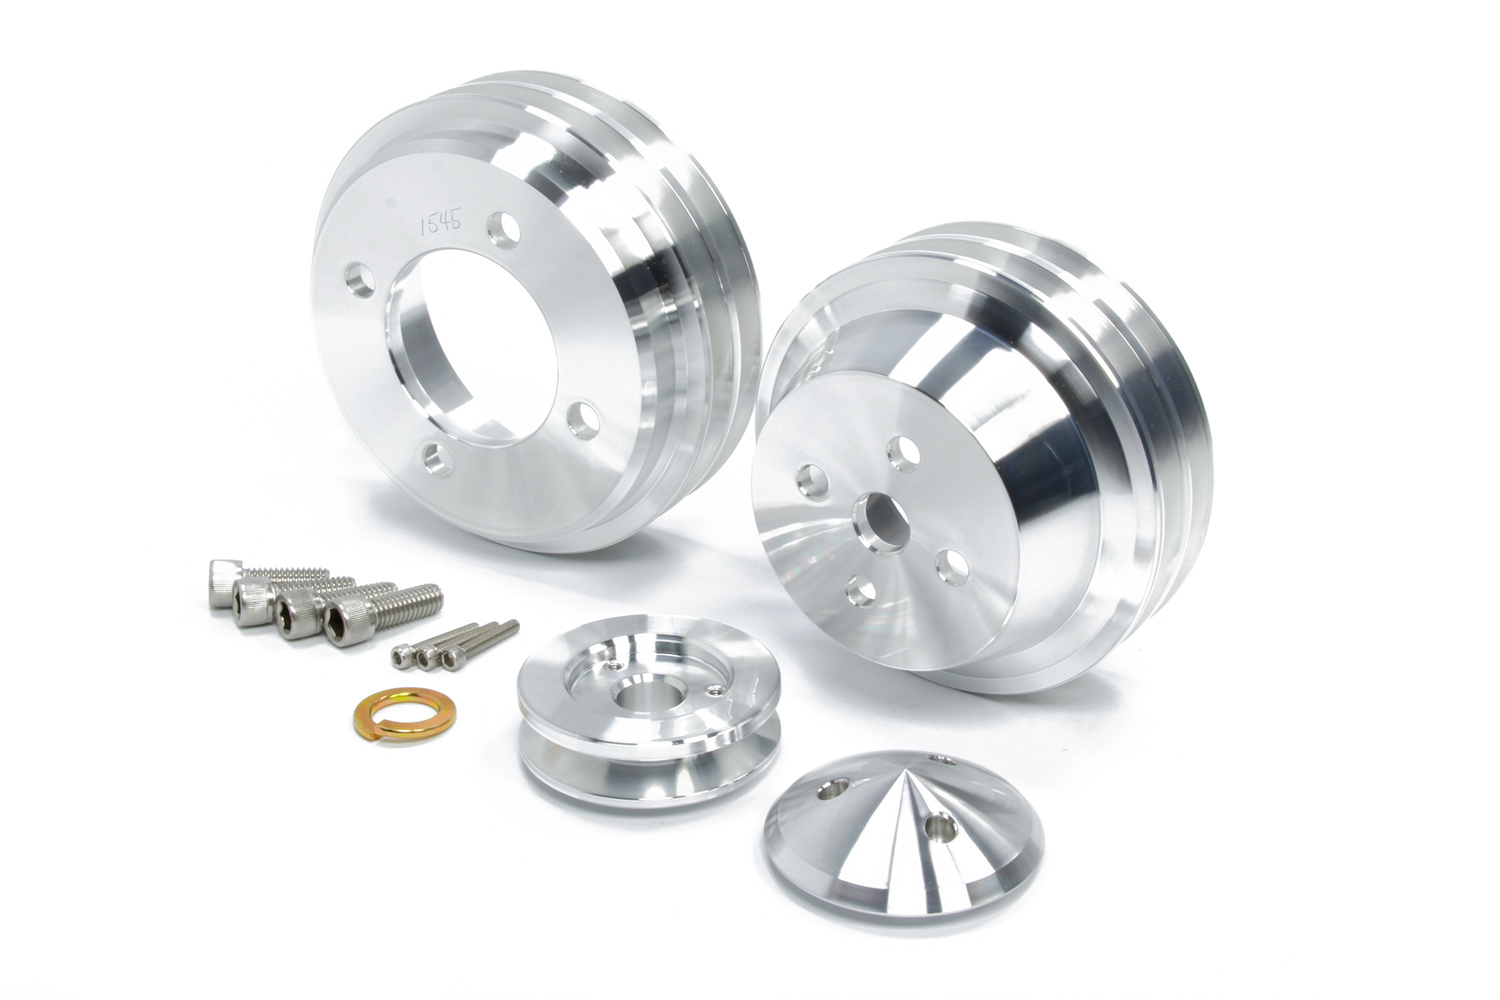 March Performance 1637 Pulley Kit, High Water Flow Ratio, 2 Groove V-Belt, Aluminum, Clear Powder Coat, Small Block Ford, Kit